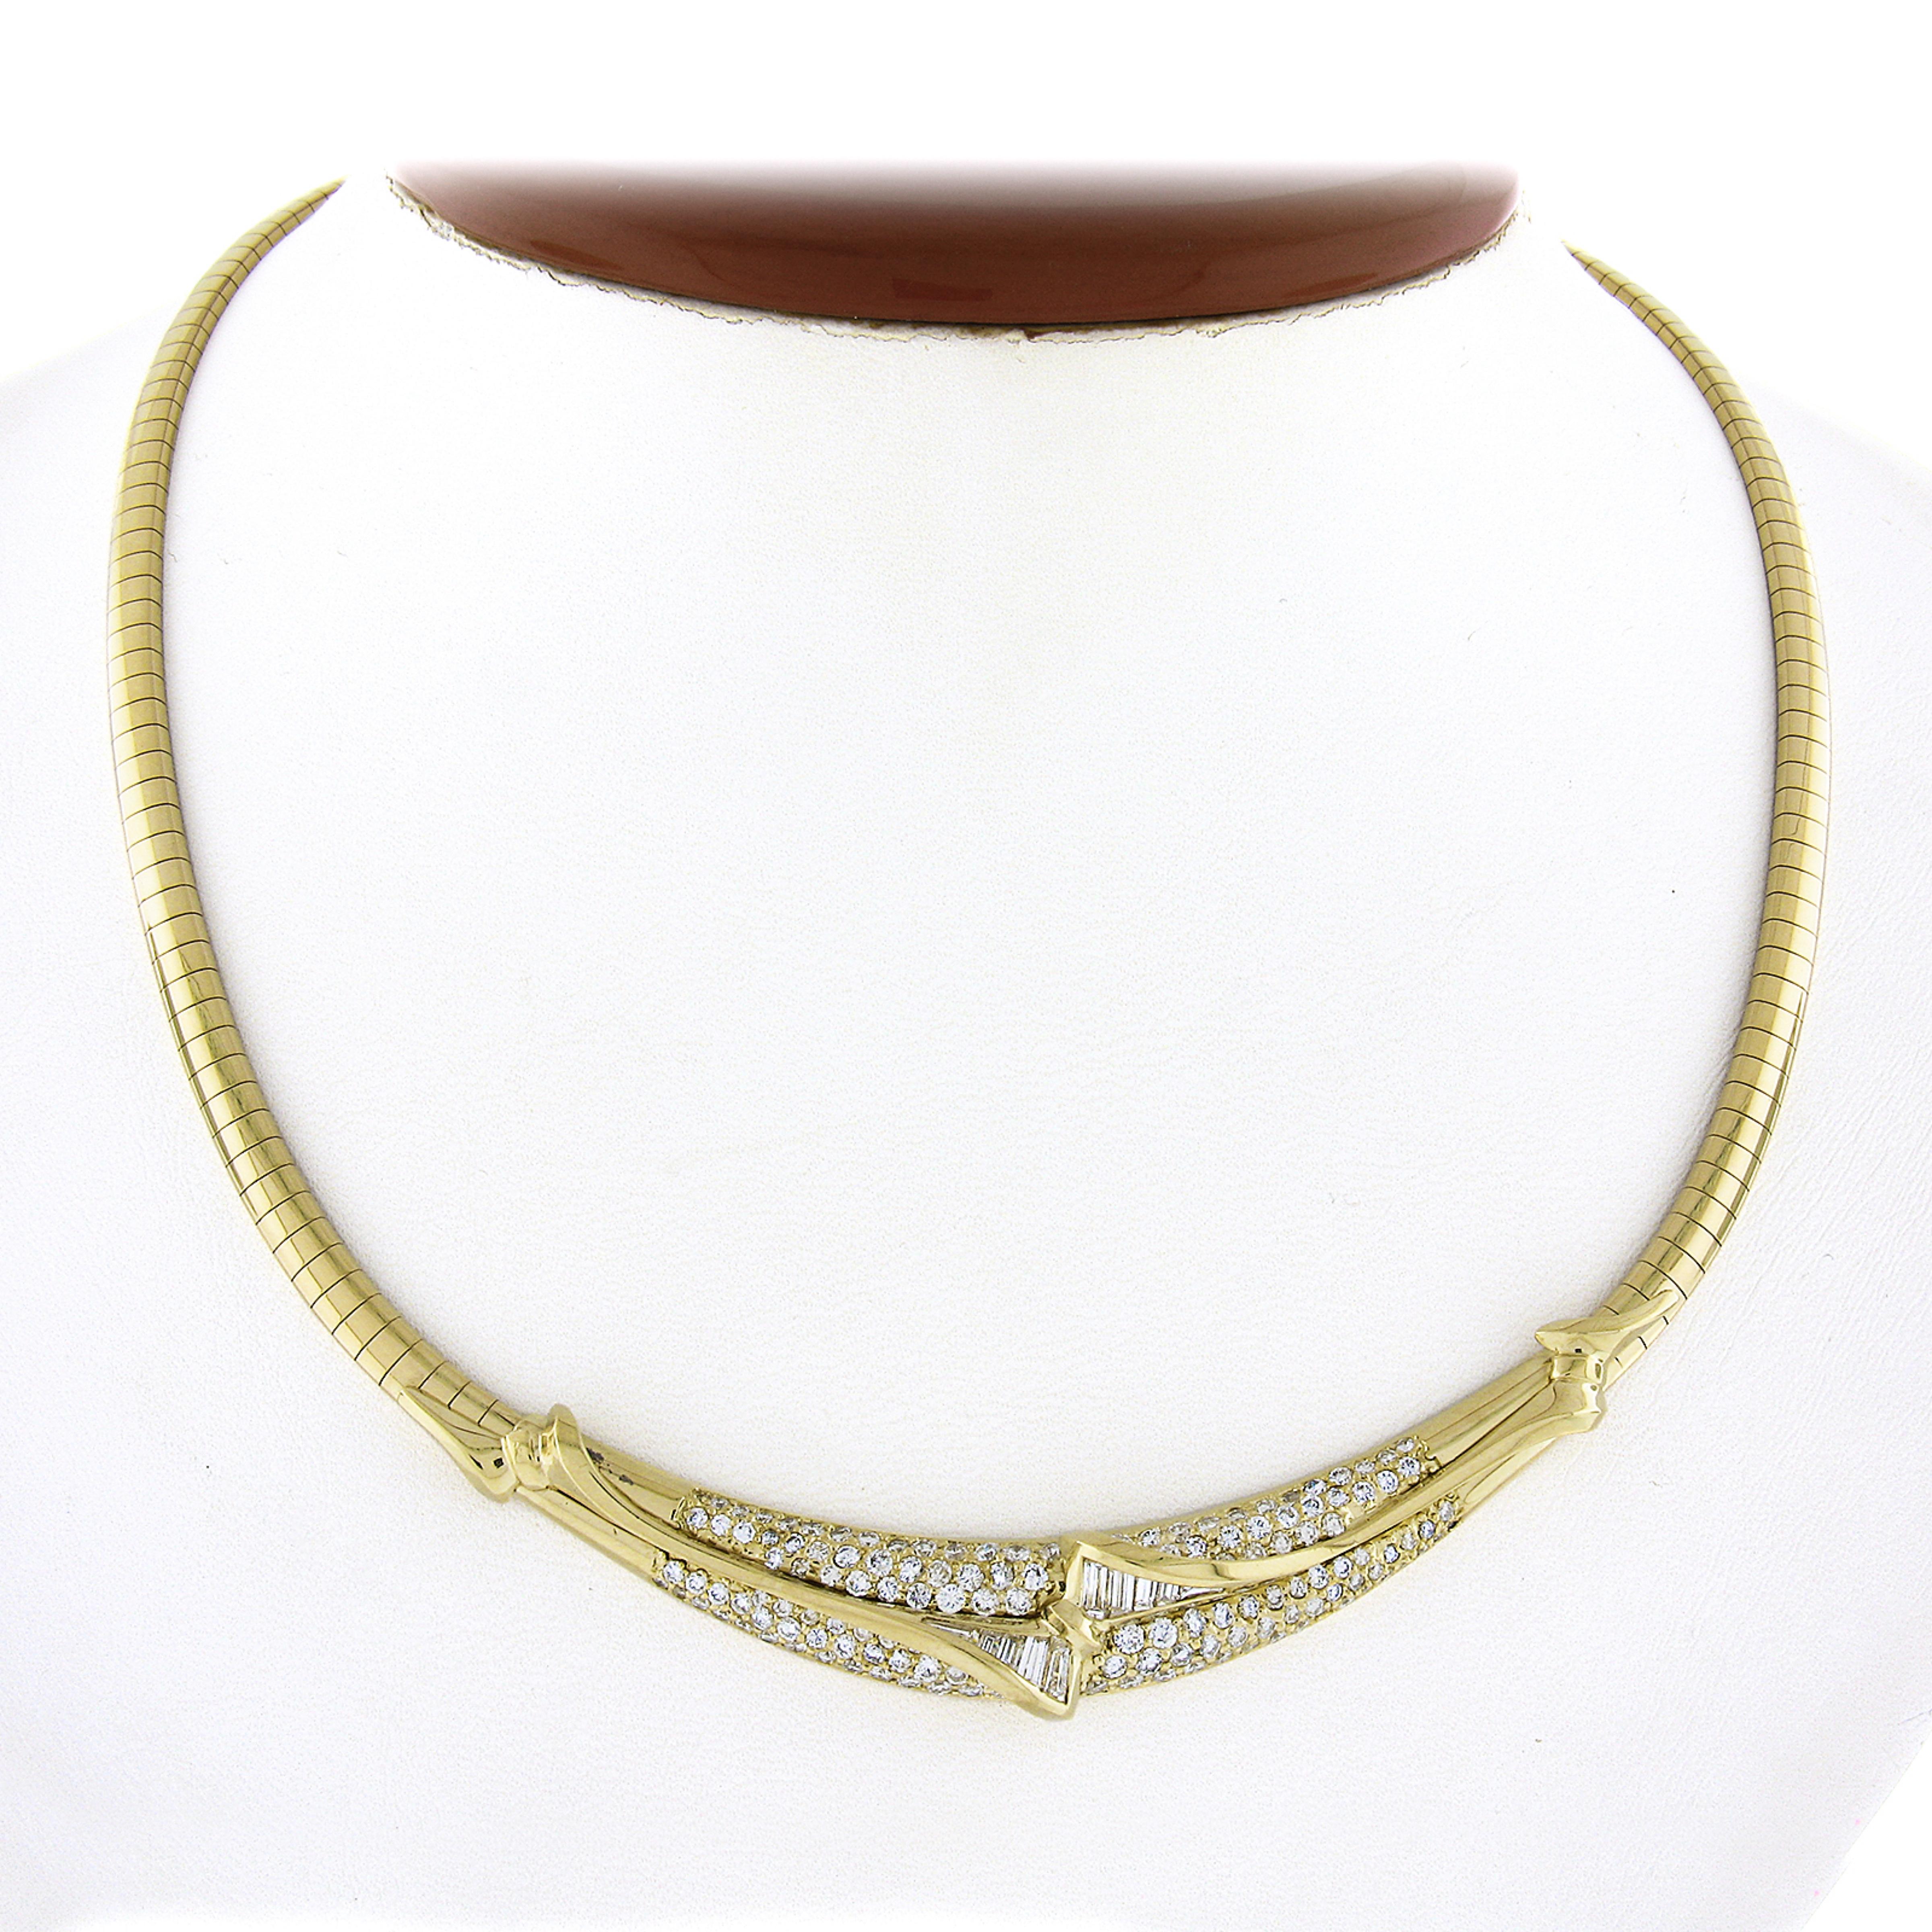 This bold, estate Italian diamond necklace is very well crafted in 18k yellow gold and features approximately 1.85 carats of the finest quality round brilliant & baguette cut diamonds. The diamonds are on FIRE! They are truly brilliant stones with